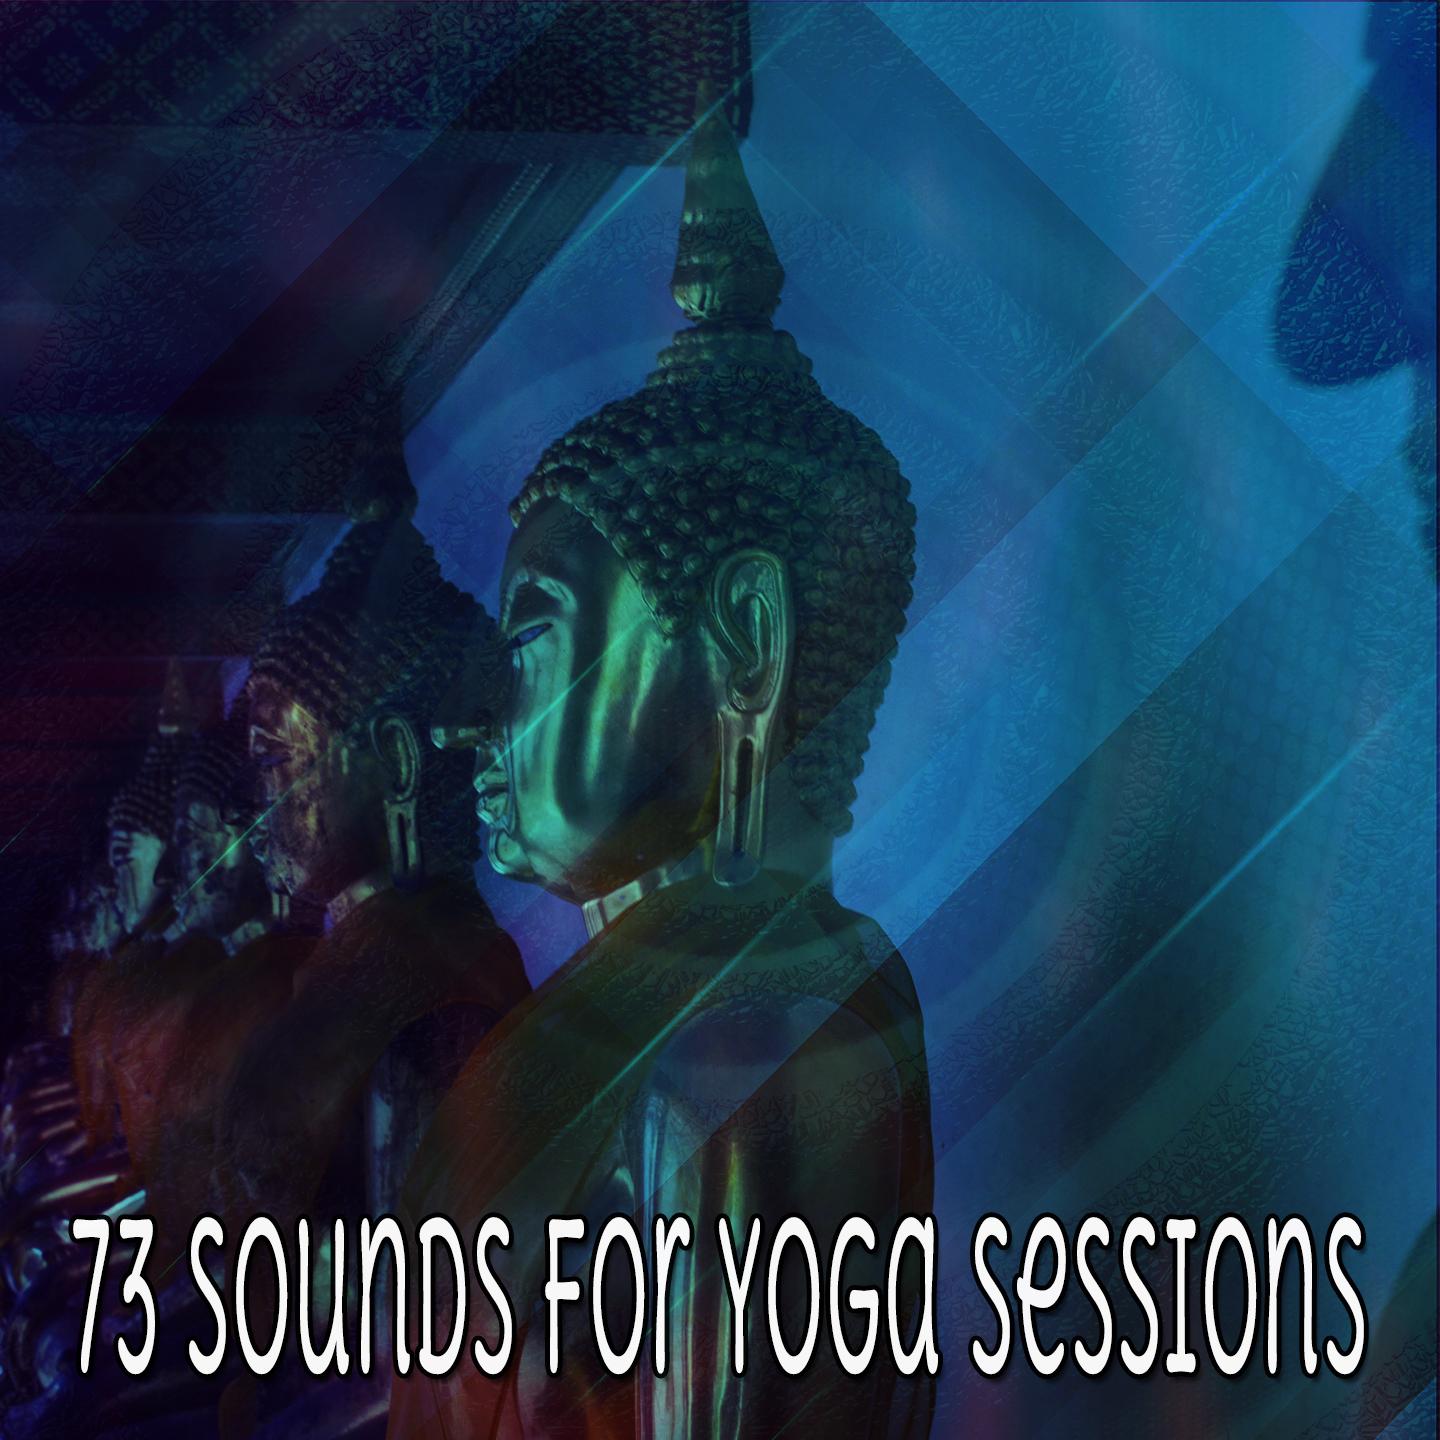 73 Sounds For Yoga Sessions